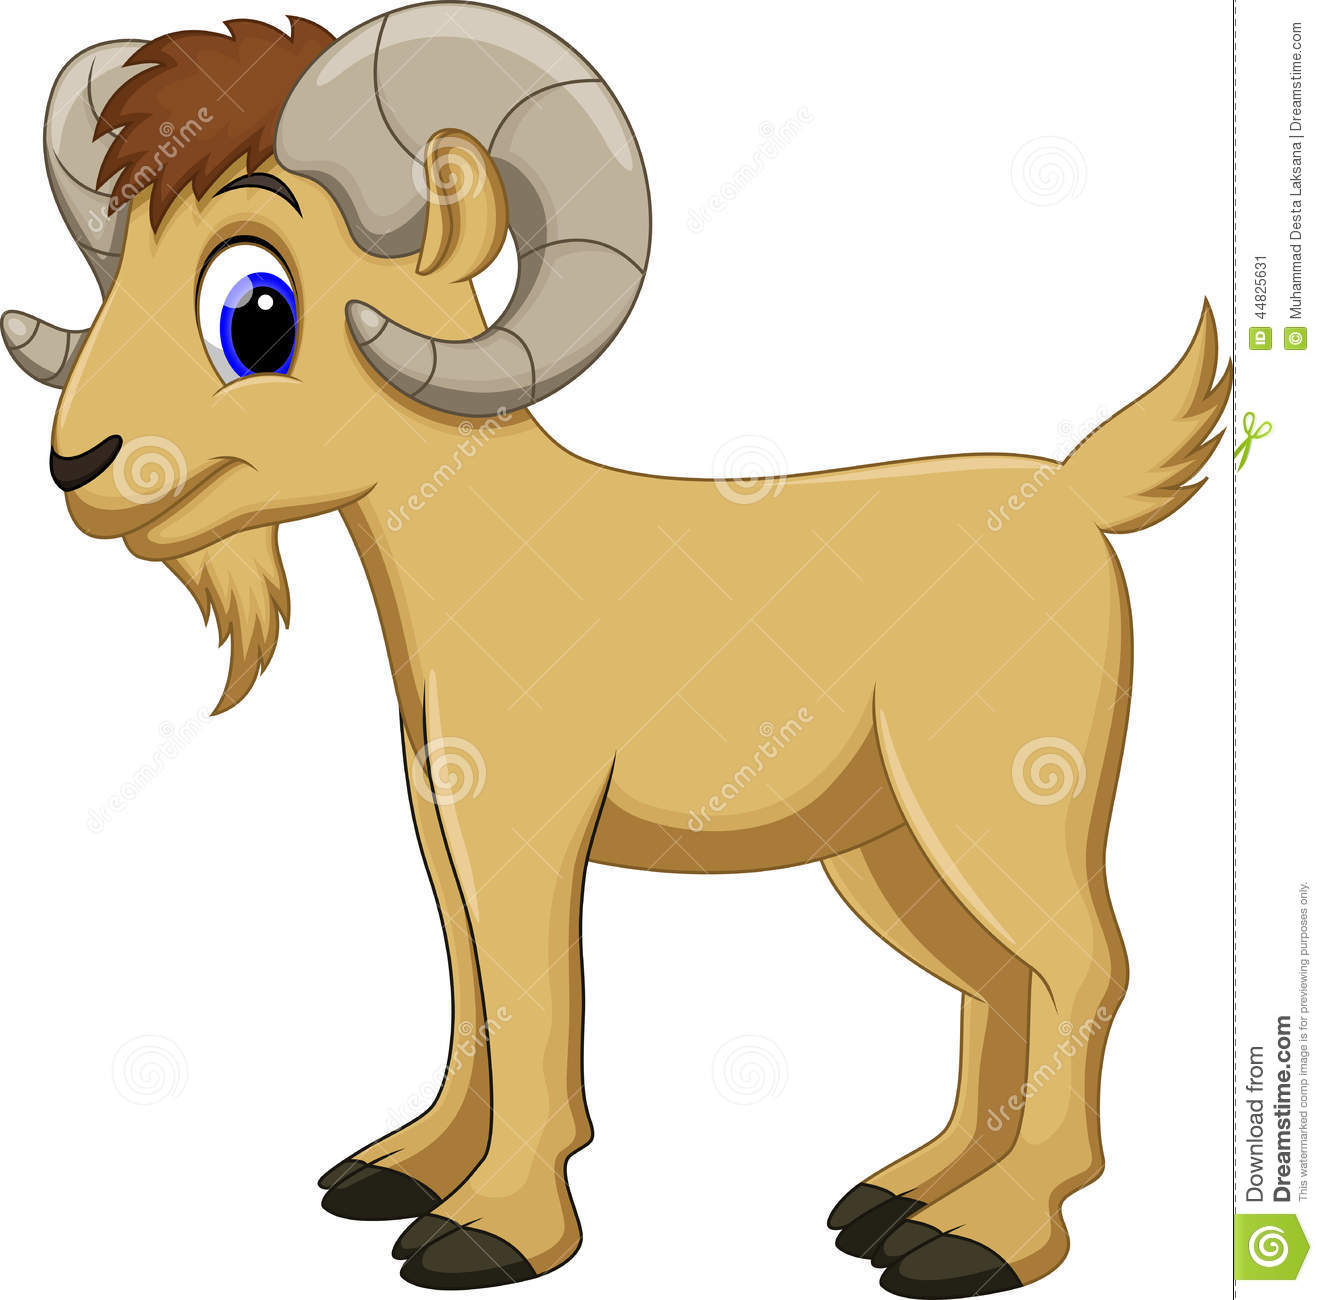 clipart of goat - photo #42